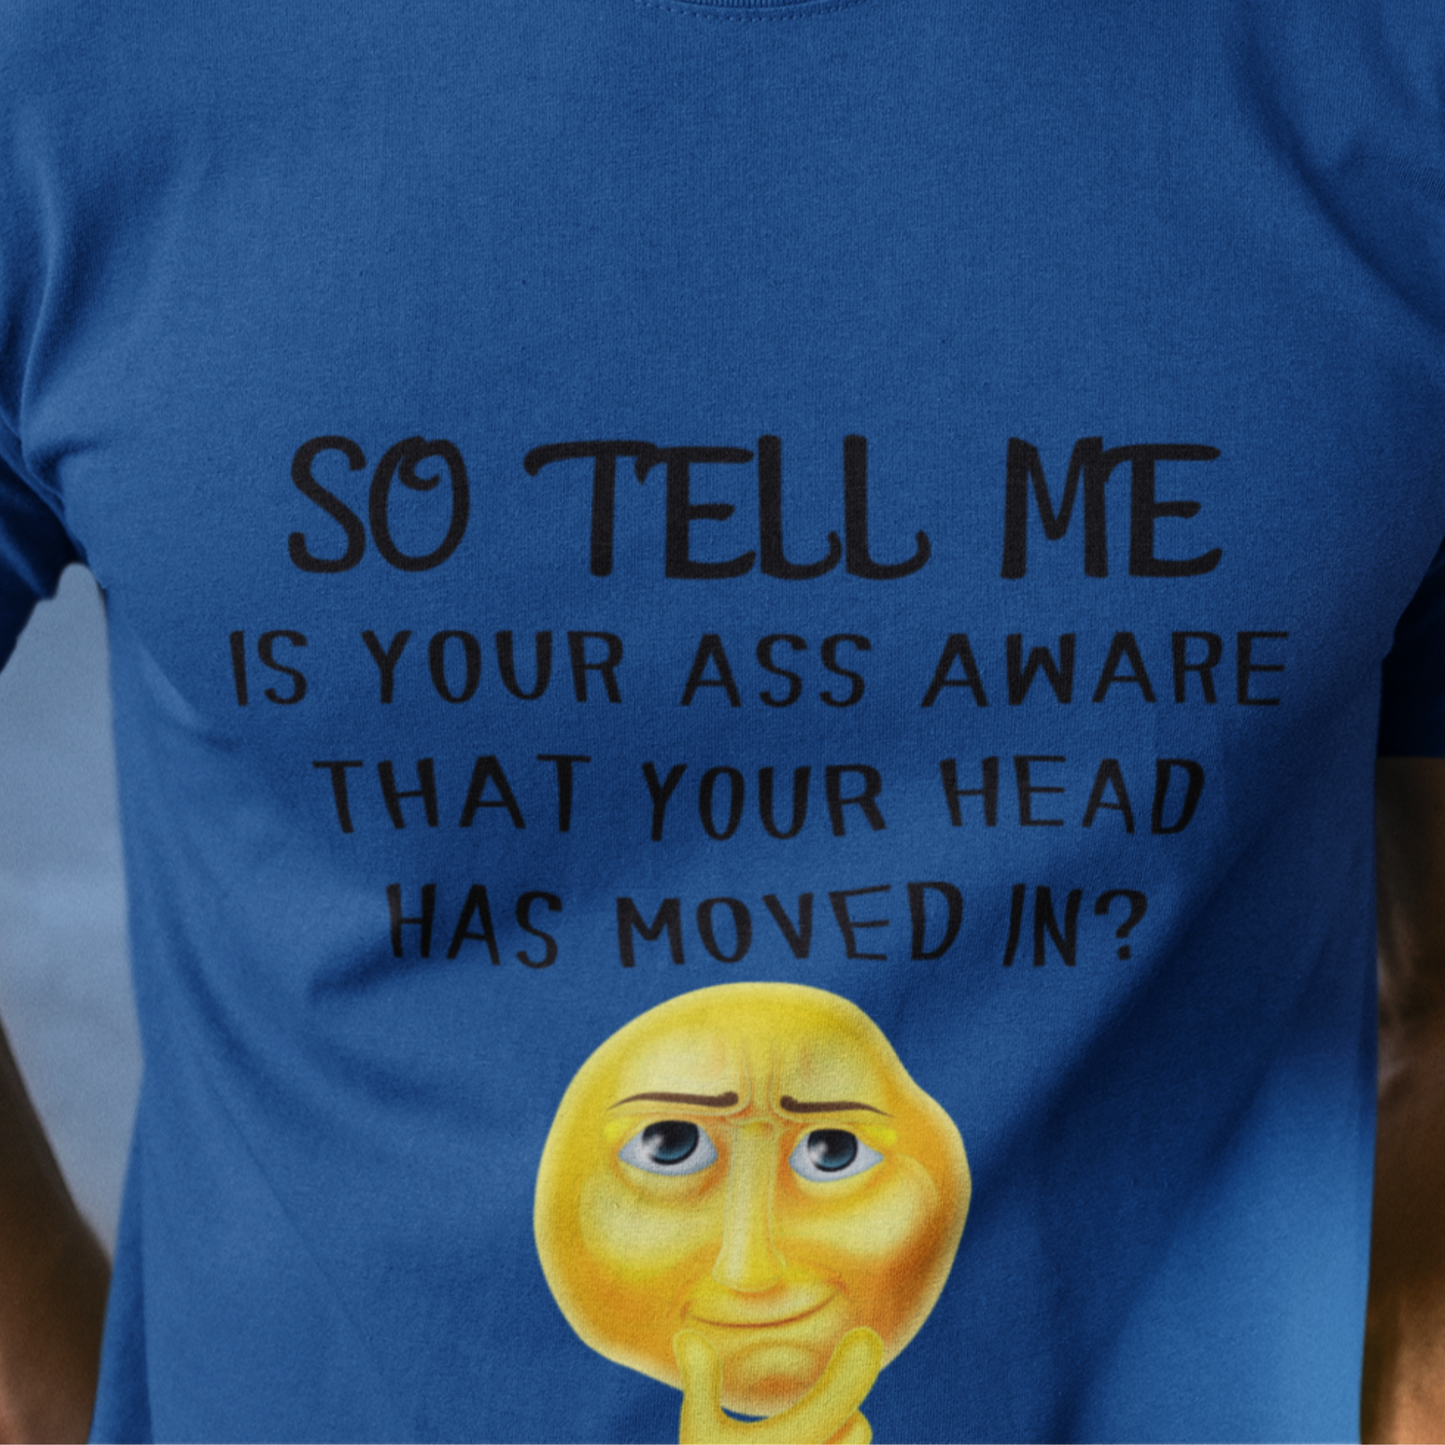 So Tell Me Is Your Ass Aware...Unisex Funny Sarcastic Shirt, Funny Shirt for Men, Fathers Day Gift, Husband Gift, Humor T-shirt, Dad Gift,  Men's Shirt